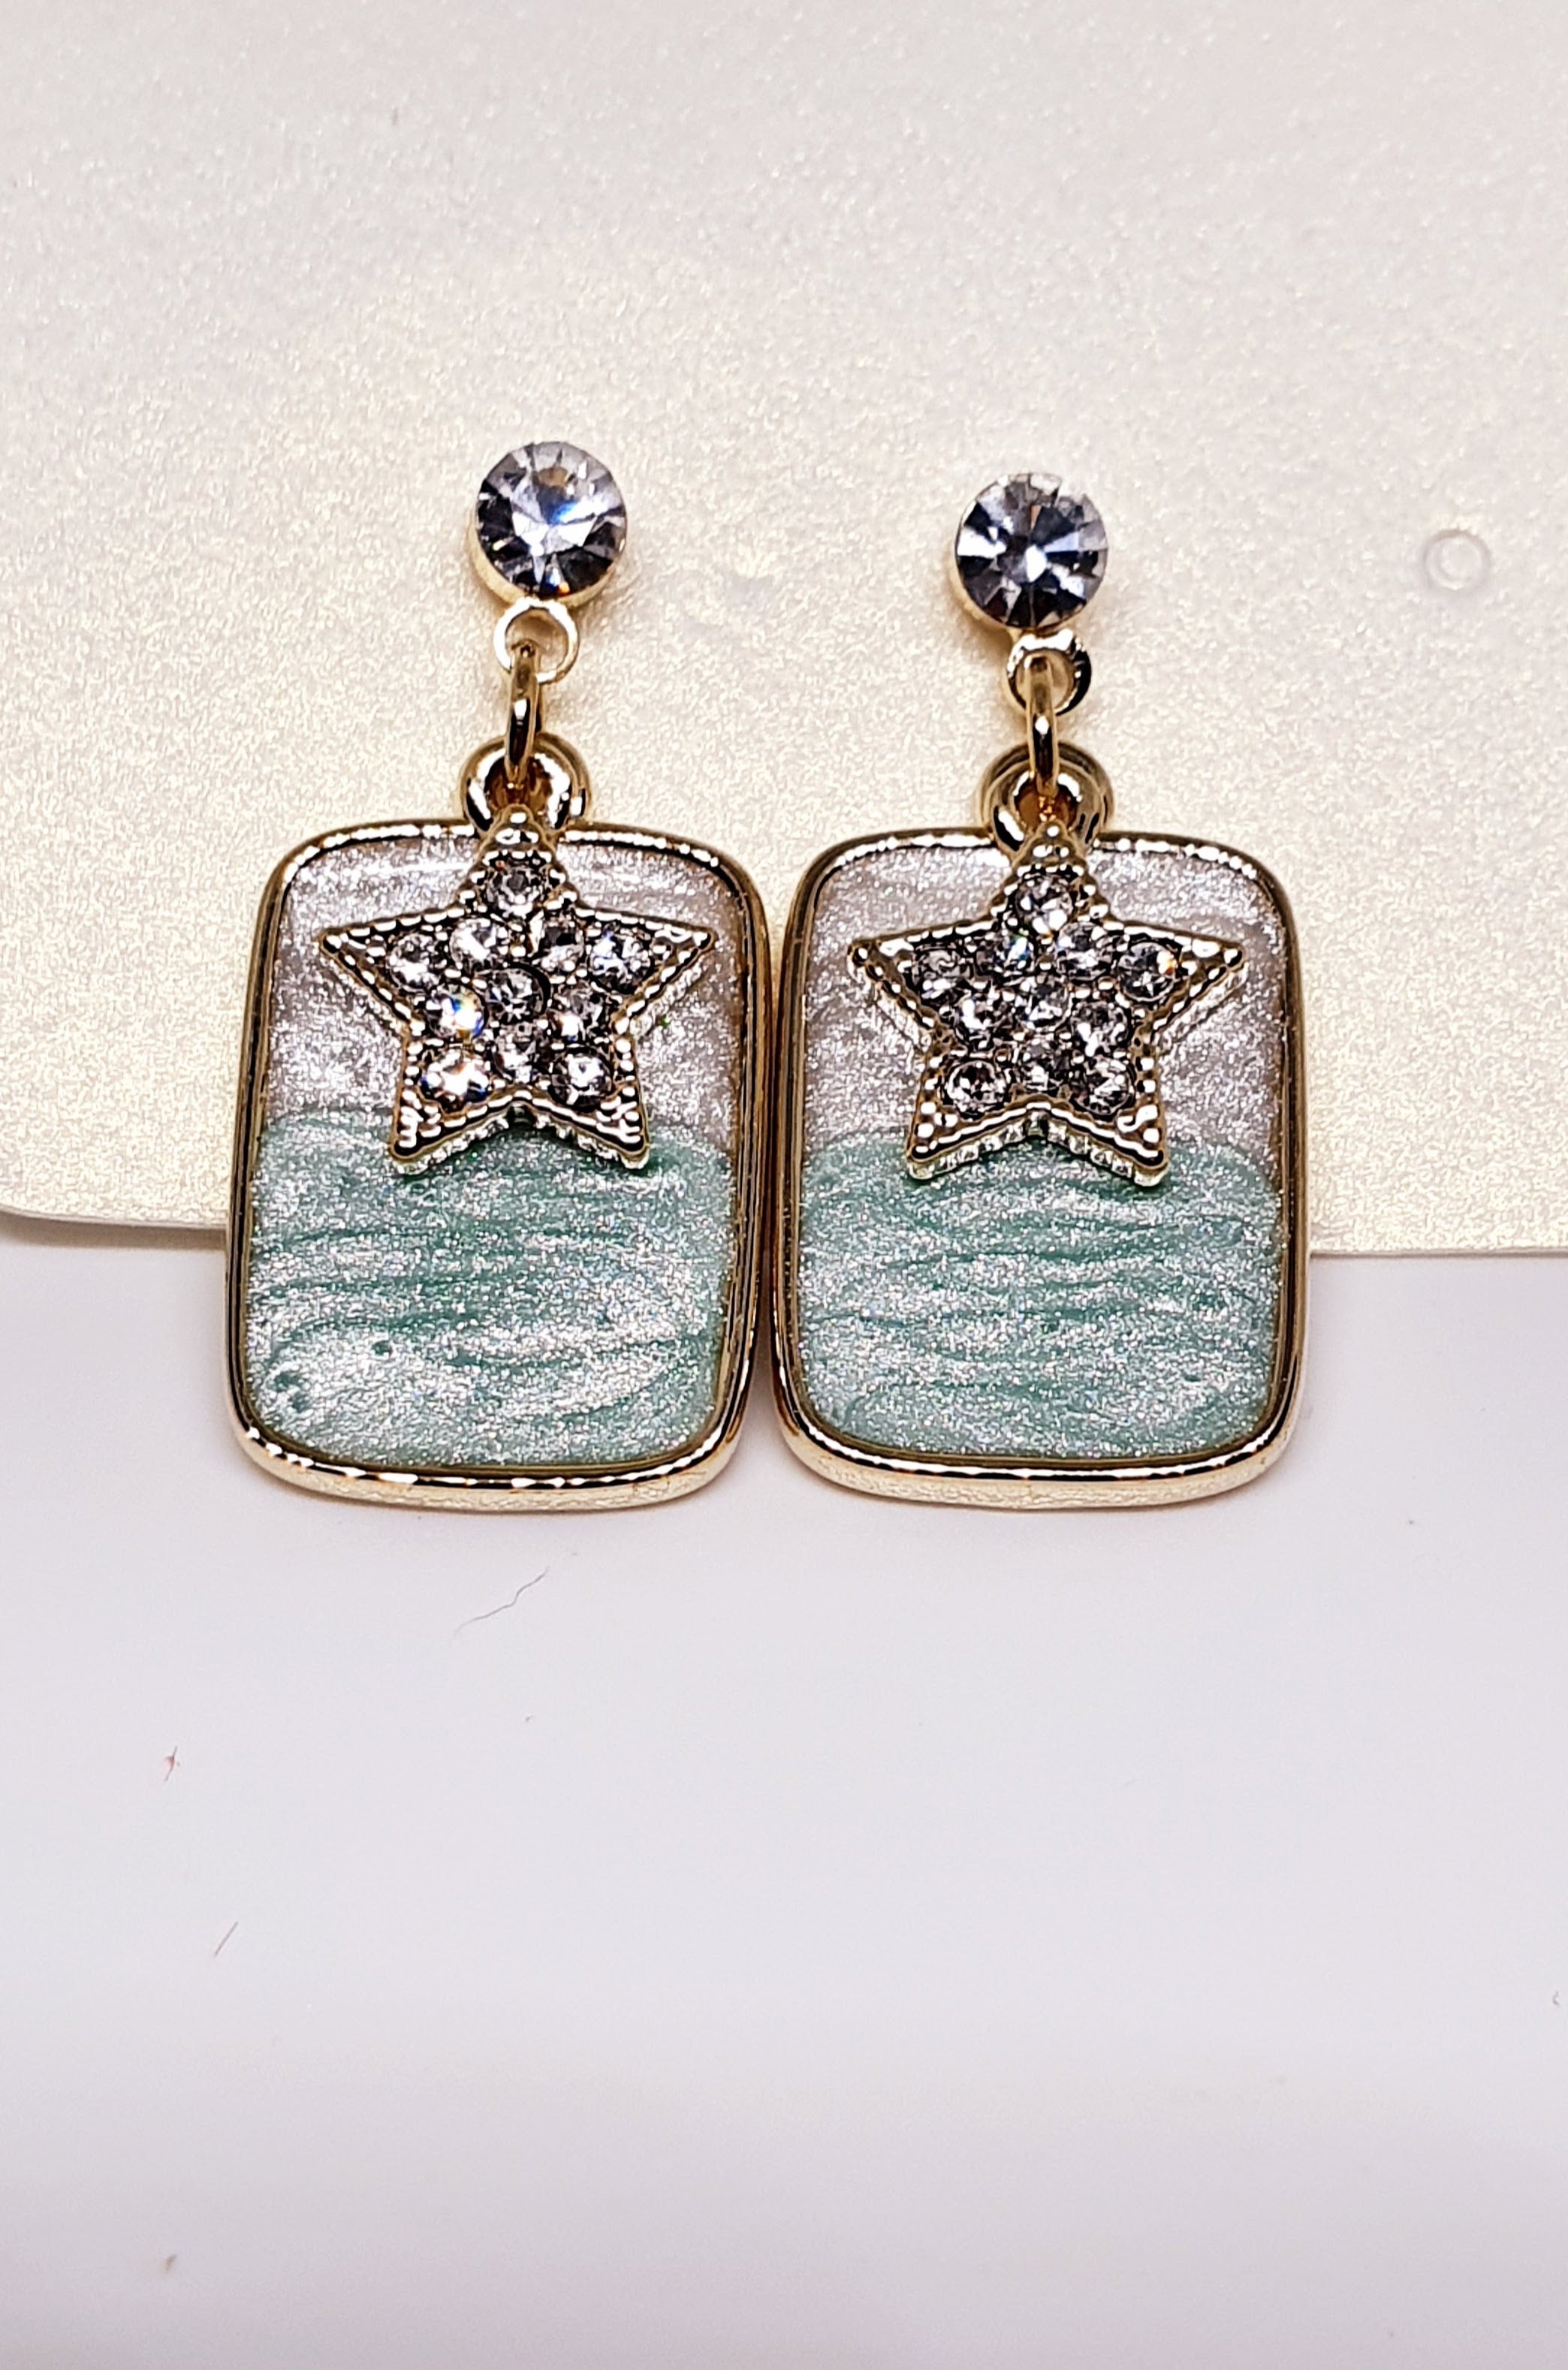 Silver Earrings with Star design - Made in Korea